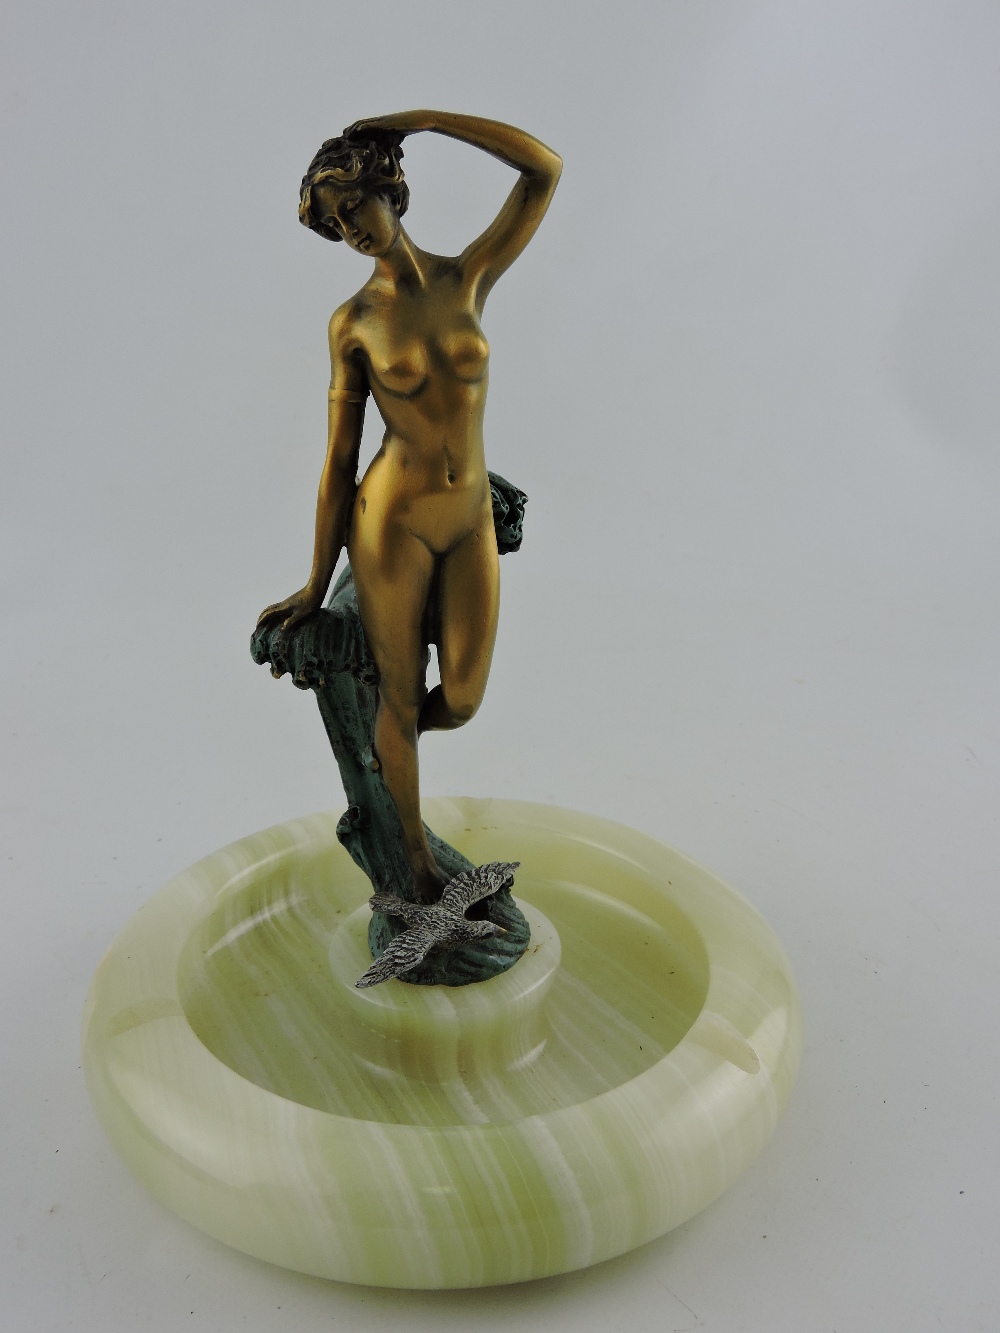 A bronze Art Nouveau style figure, nude standing with a bird at her feet, - Image 2 of 2